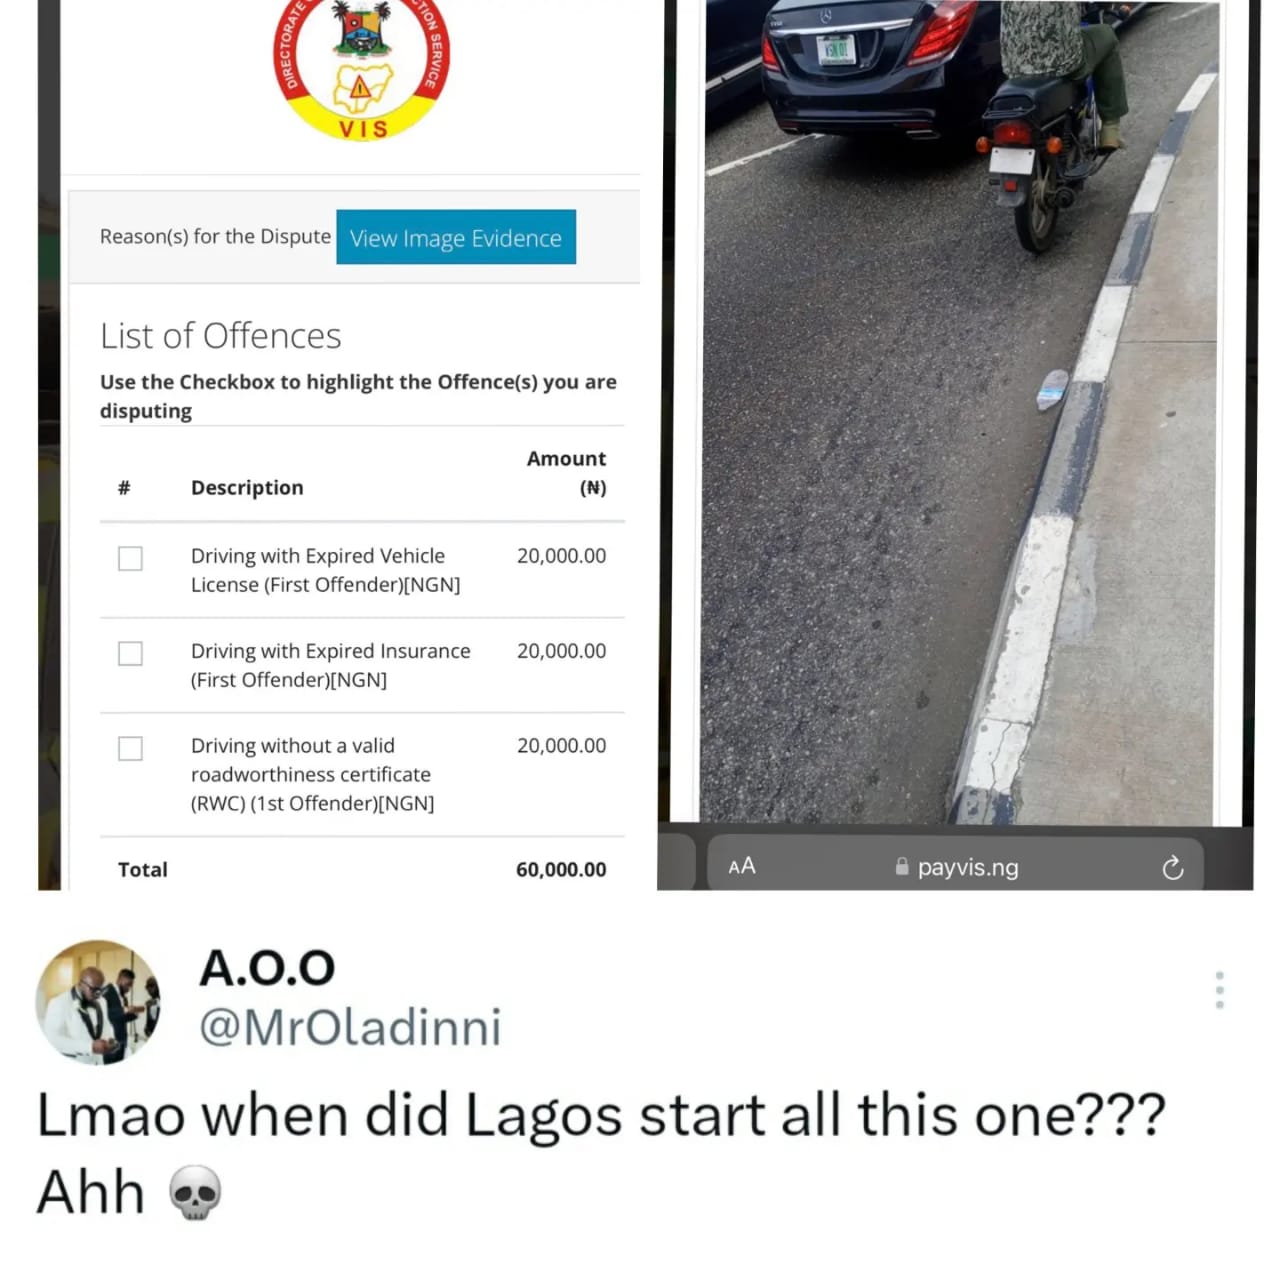 Shock as Vehicle Number-Plate Recognition Camera Caught Nigerian Man With Expired Paper, Bags Automatically Fined N60k